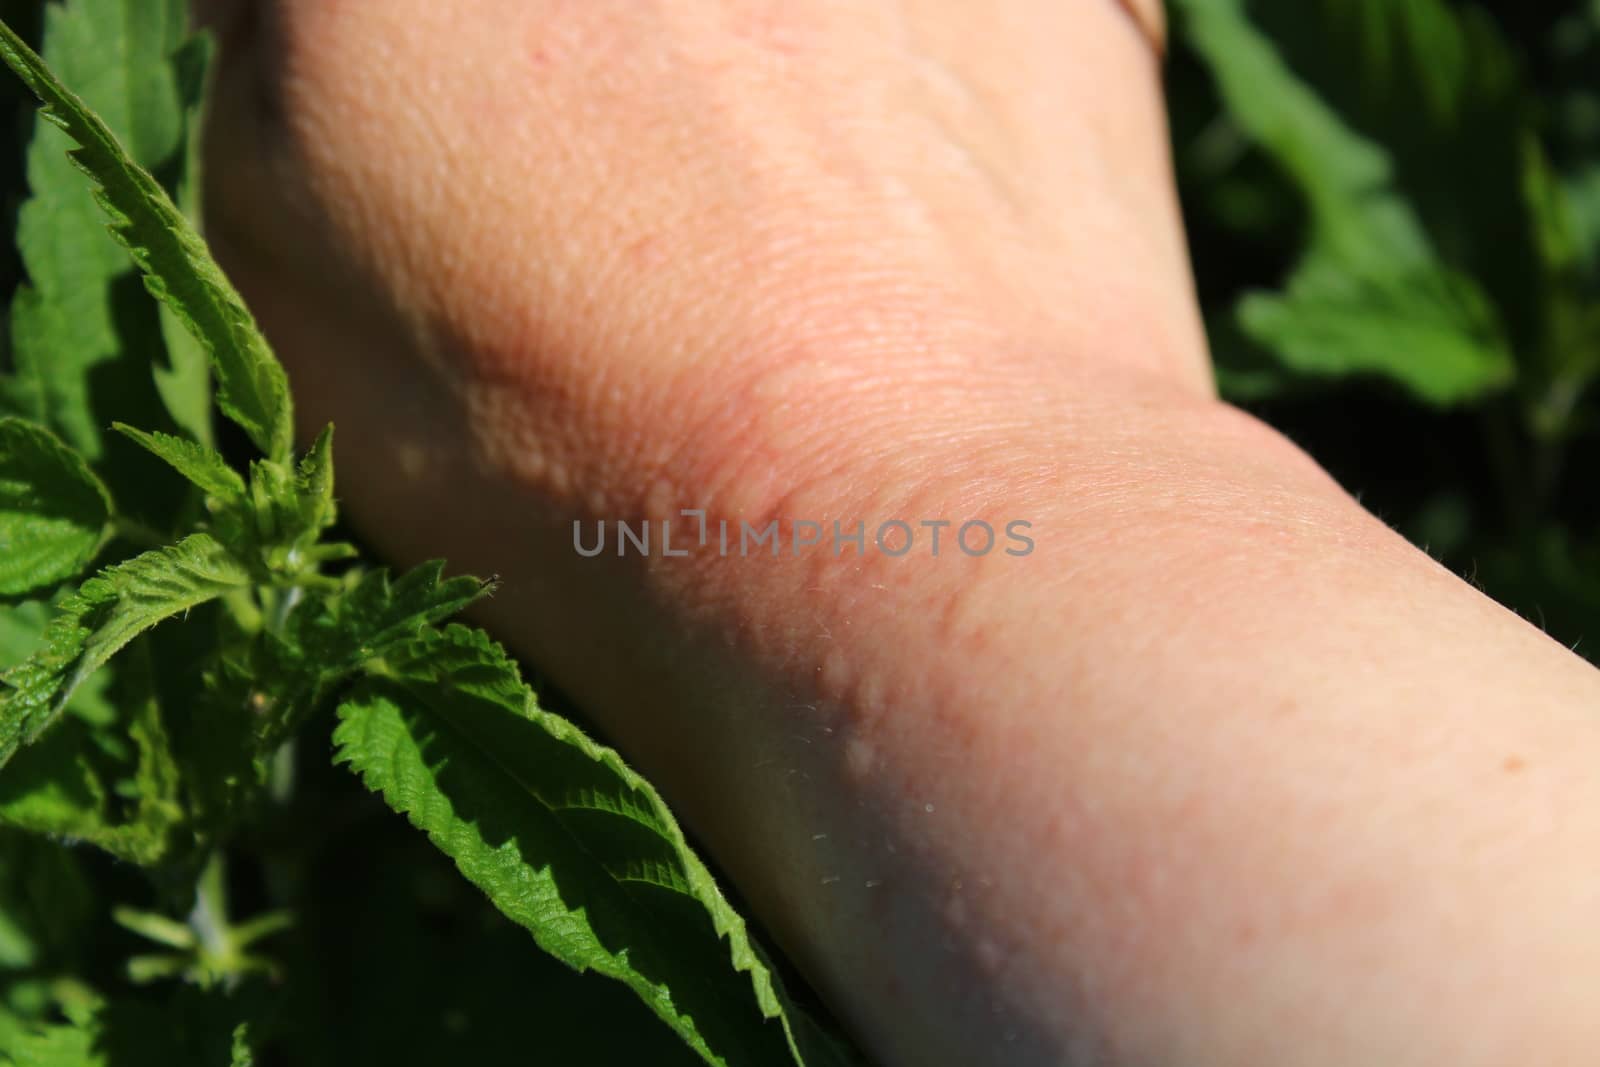 stinging nettles and an arm with nettle stings by martina_unbehauen